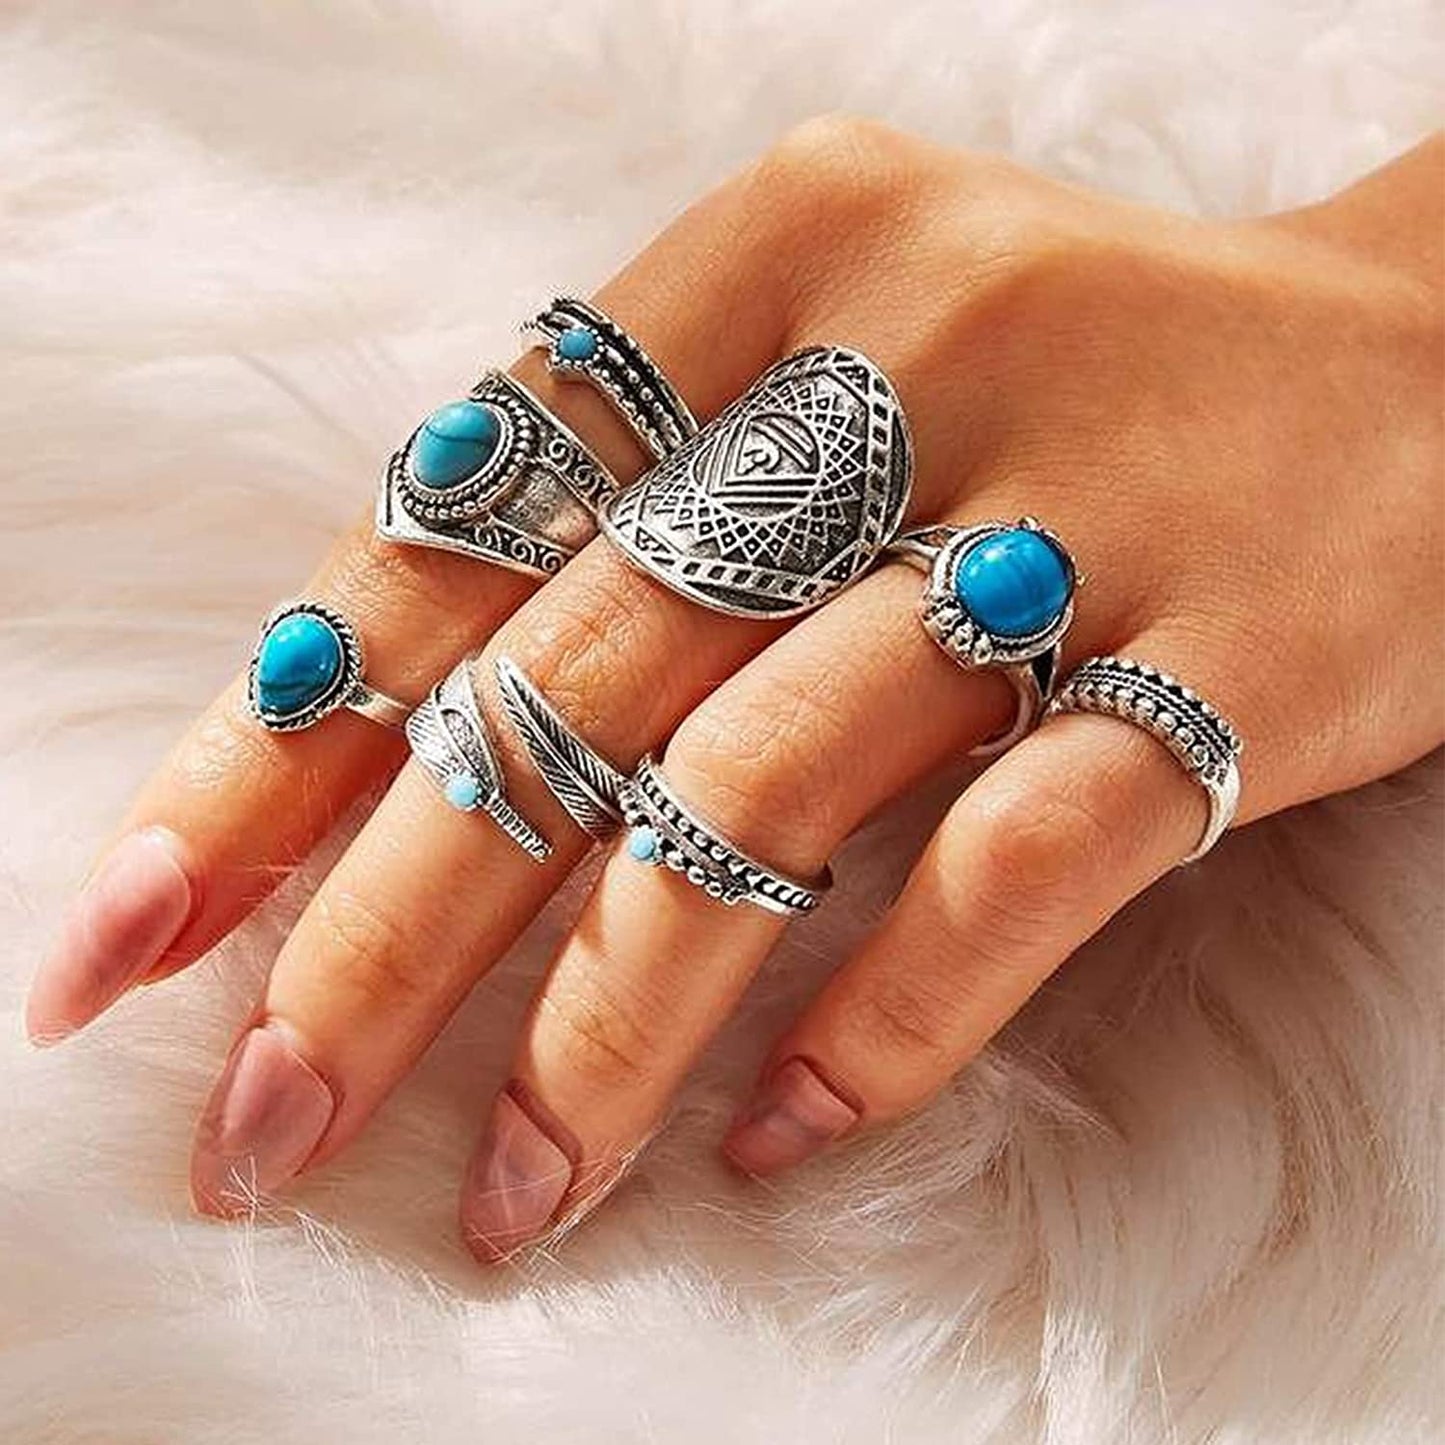 82 Pcs Vintage Silver Knuckle Rings Set for Women, Bohemian Stackable Joint Finger Rings, Retro Stone Crystal Stacking Midi Rings Pack